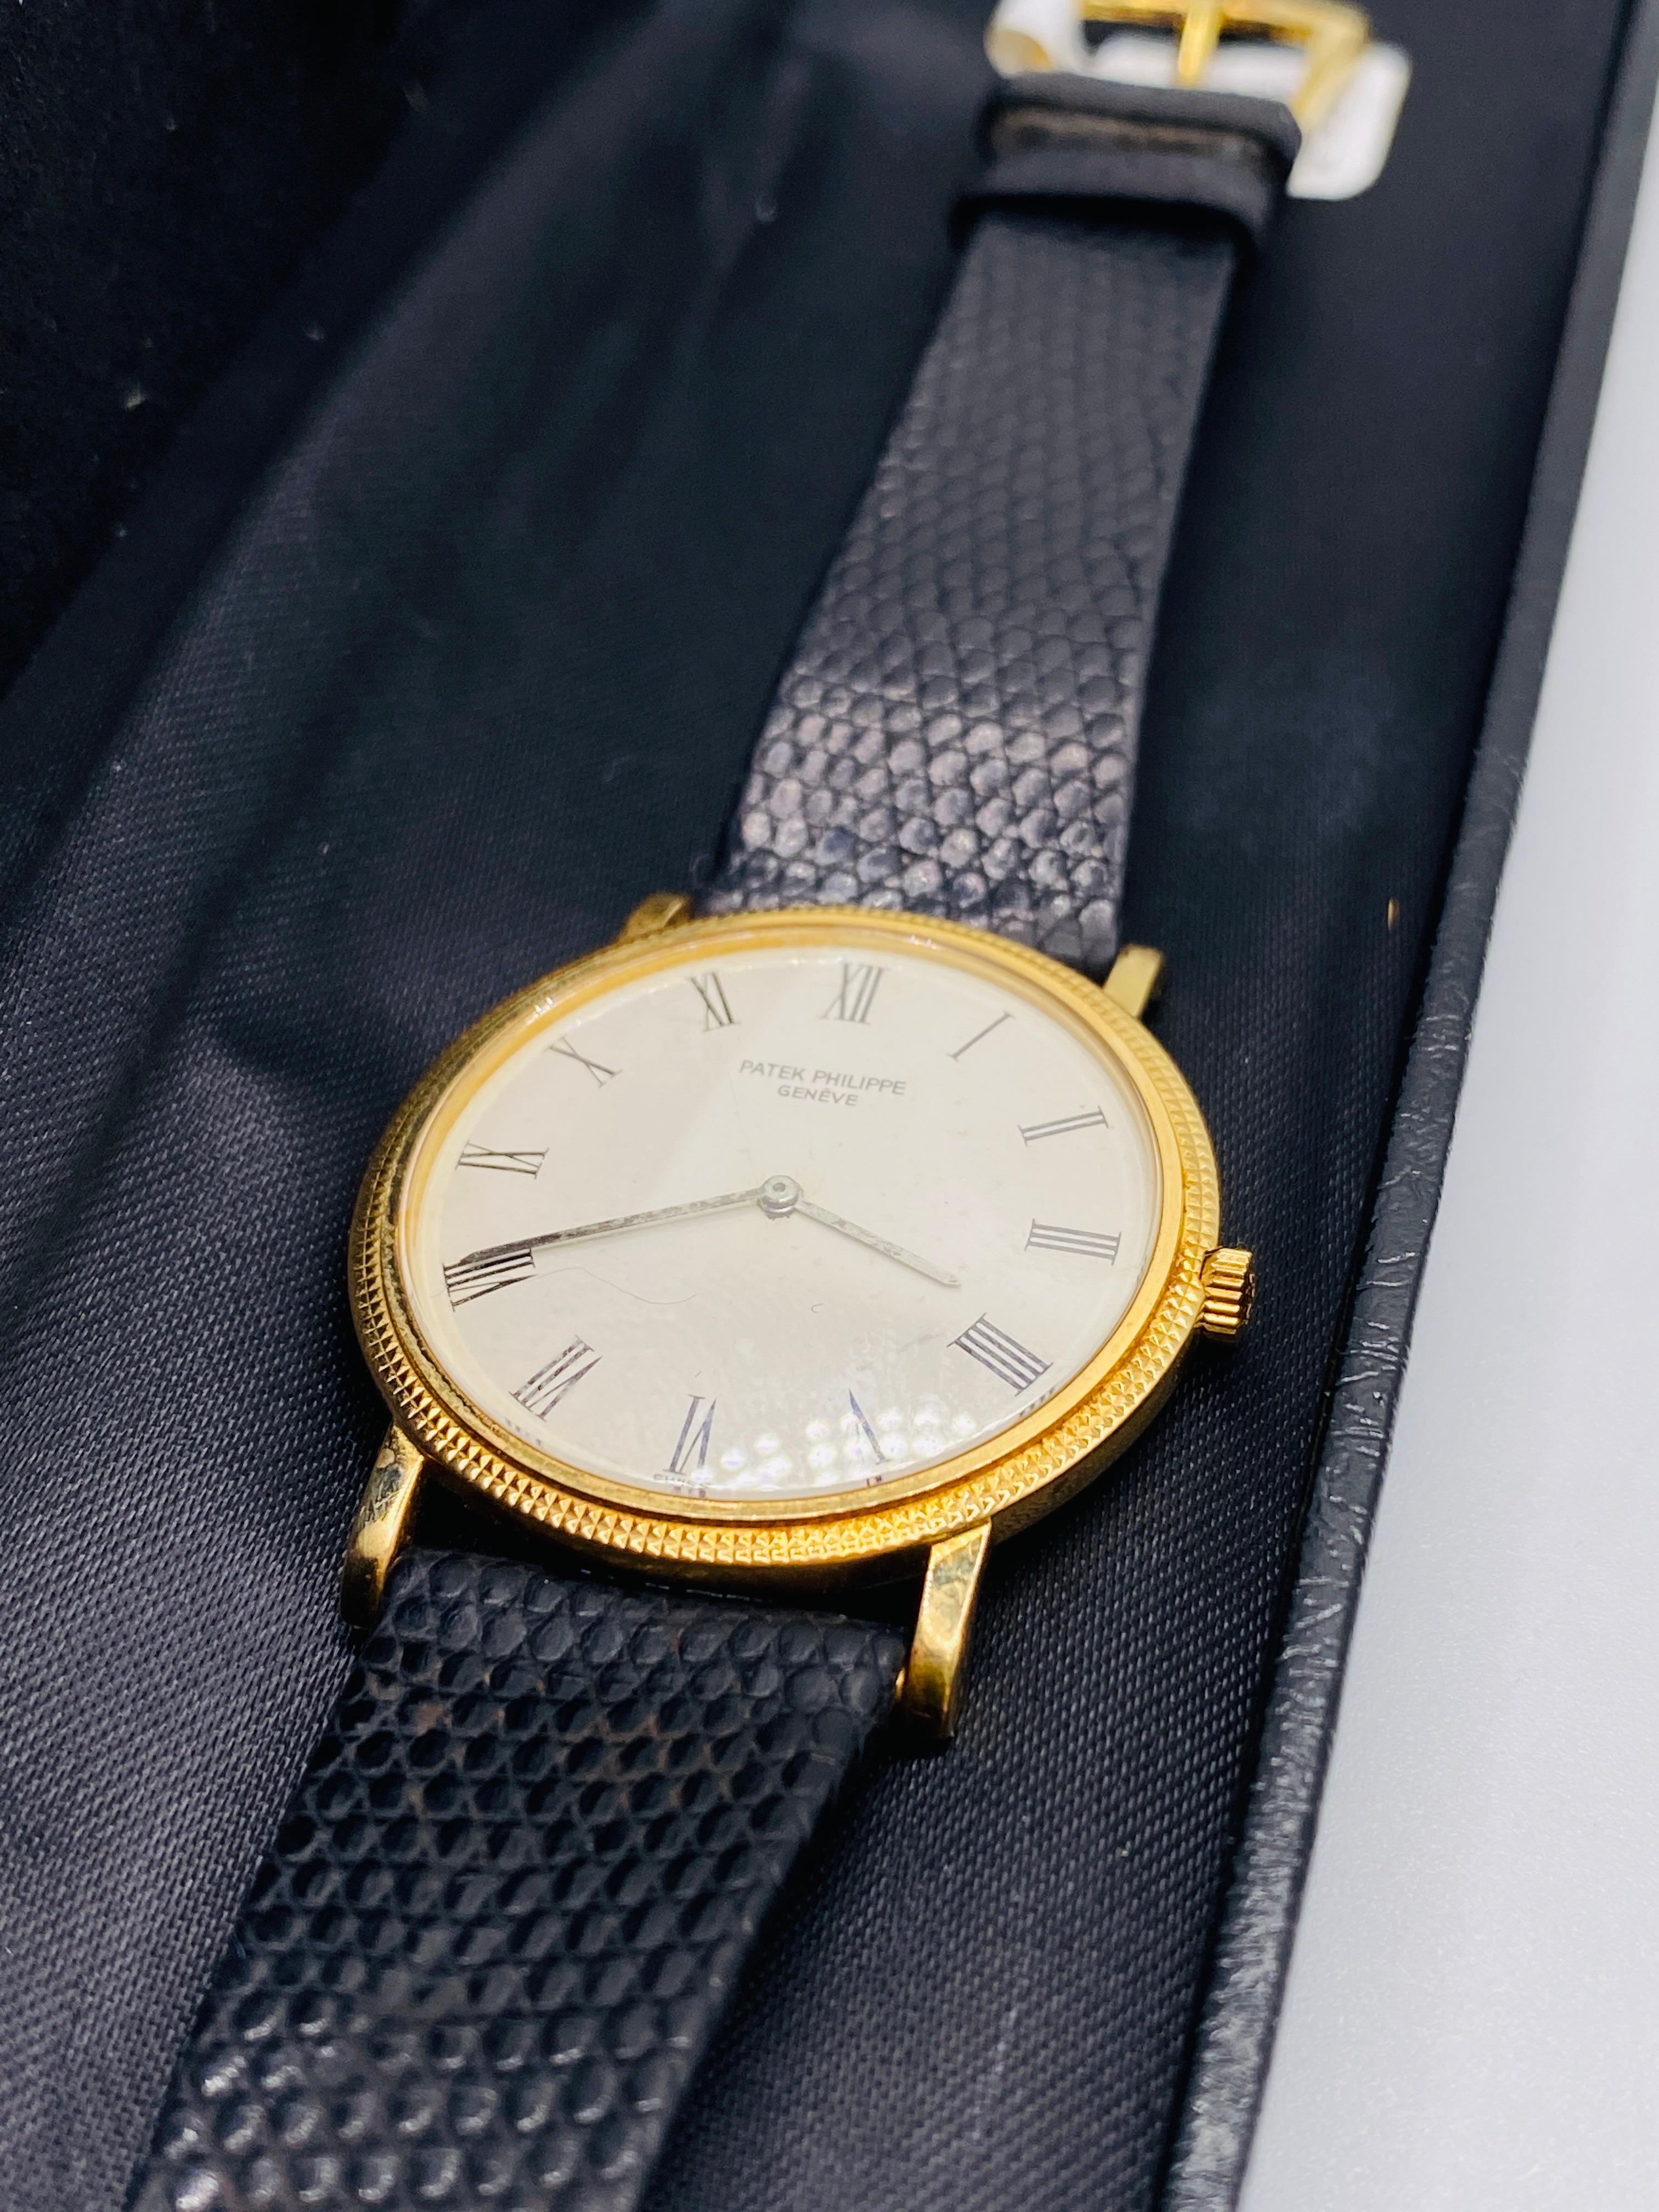 18k yellow gold Patek Phillipe Calatrava Swiss made ultra thin watch with mechanical movement with hobnail patterned case. Model 3520d. Water resistant to 25m. Serviced 4/18/22. Hallmarked with the Geneva seal. Includes original band, box and papers.